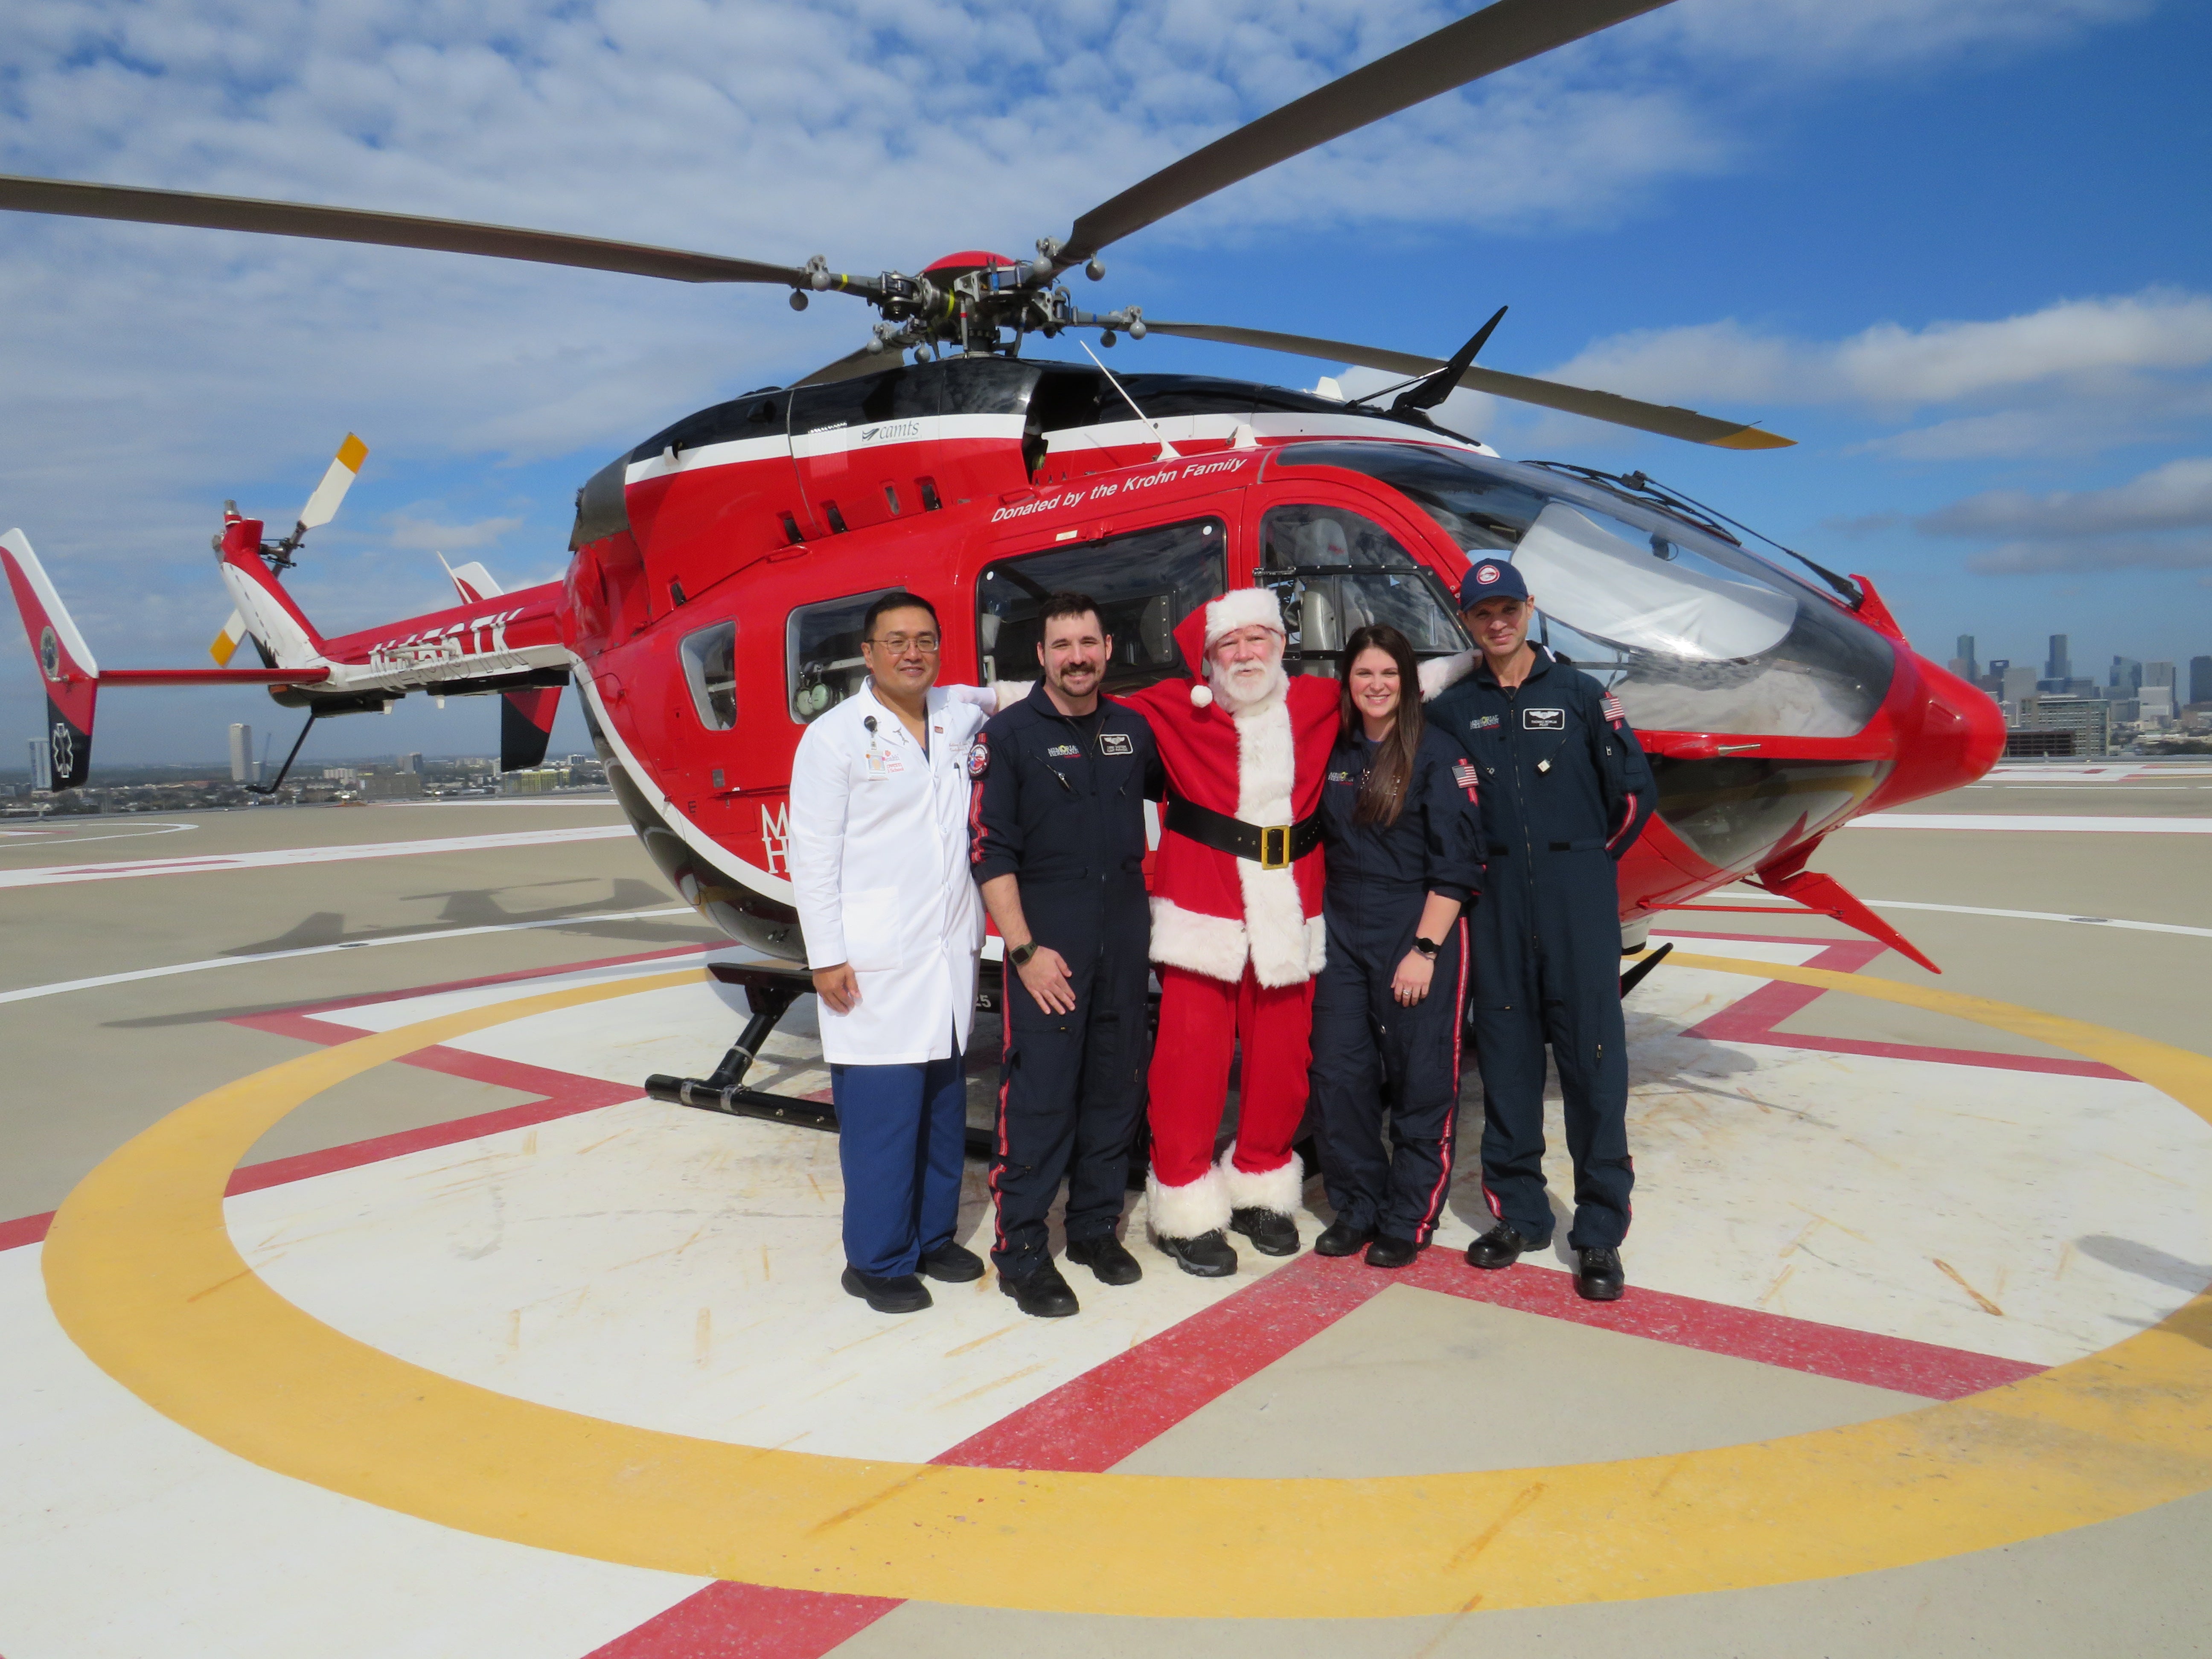 For a Texas cardiologist who recently saved Santa Claus' life, Christmas came early when Kris Kringle stopped by the hospital to express his gratitude. (Memorial Hermann-Texas Medical Center)